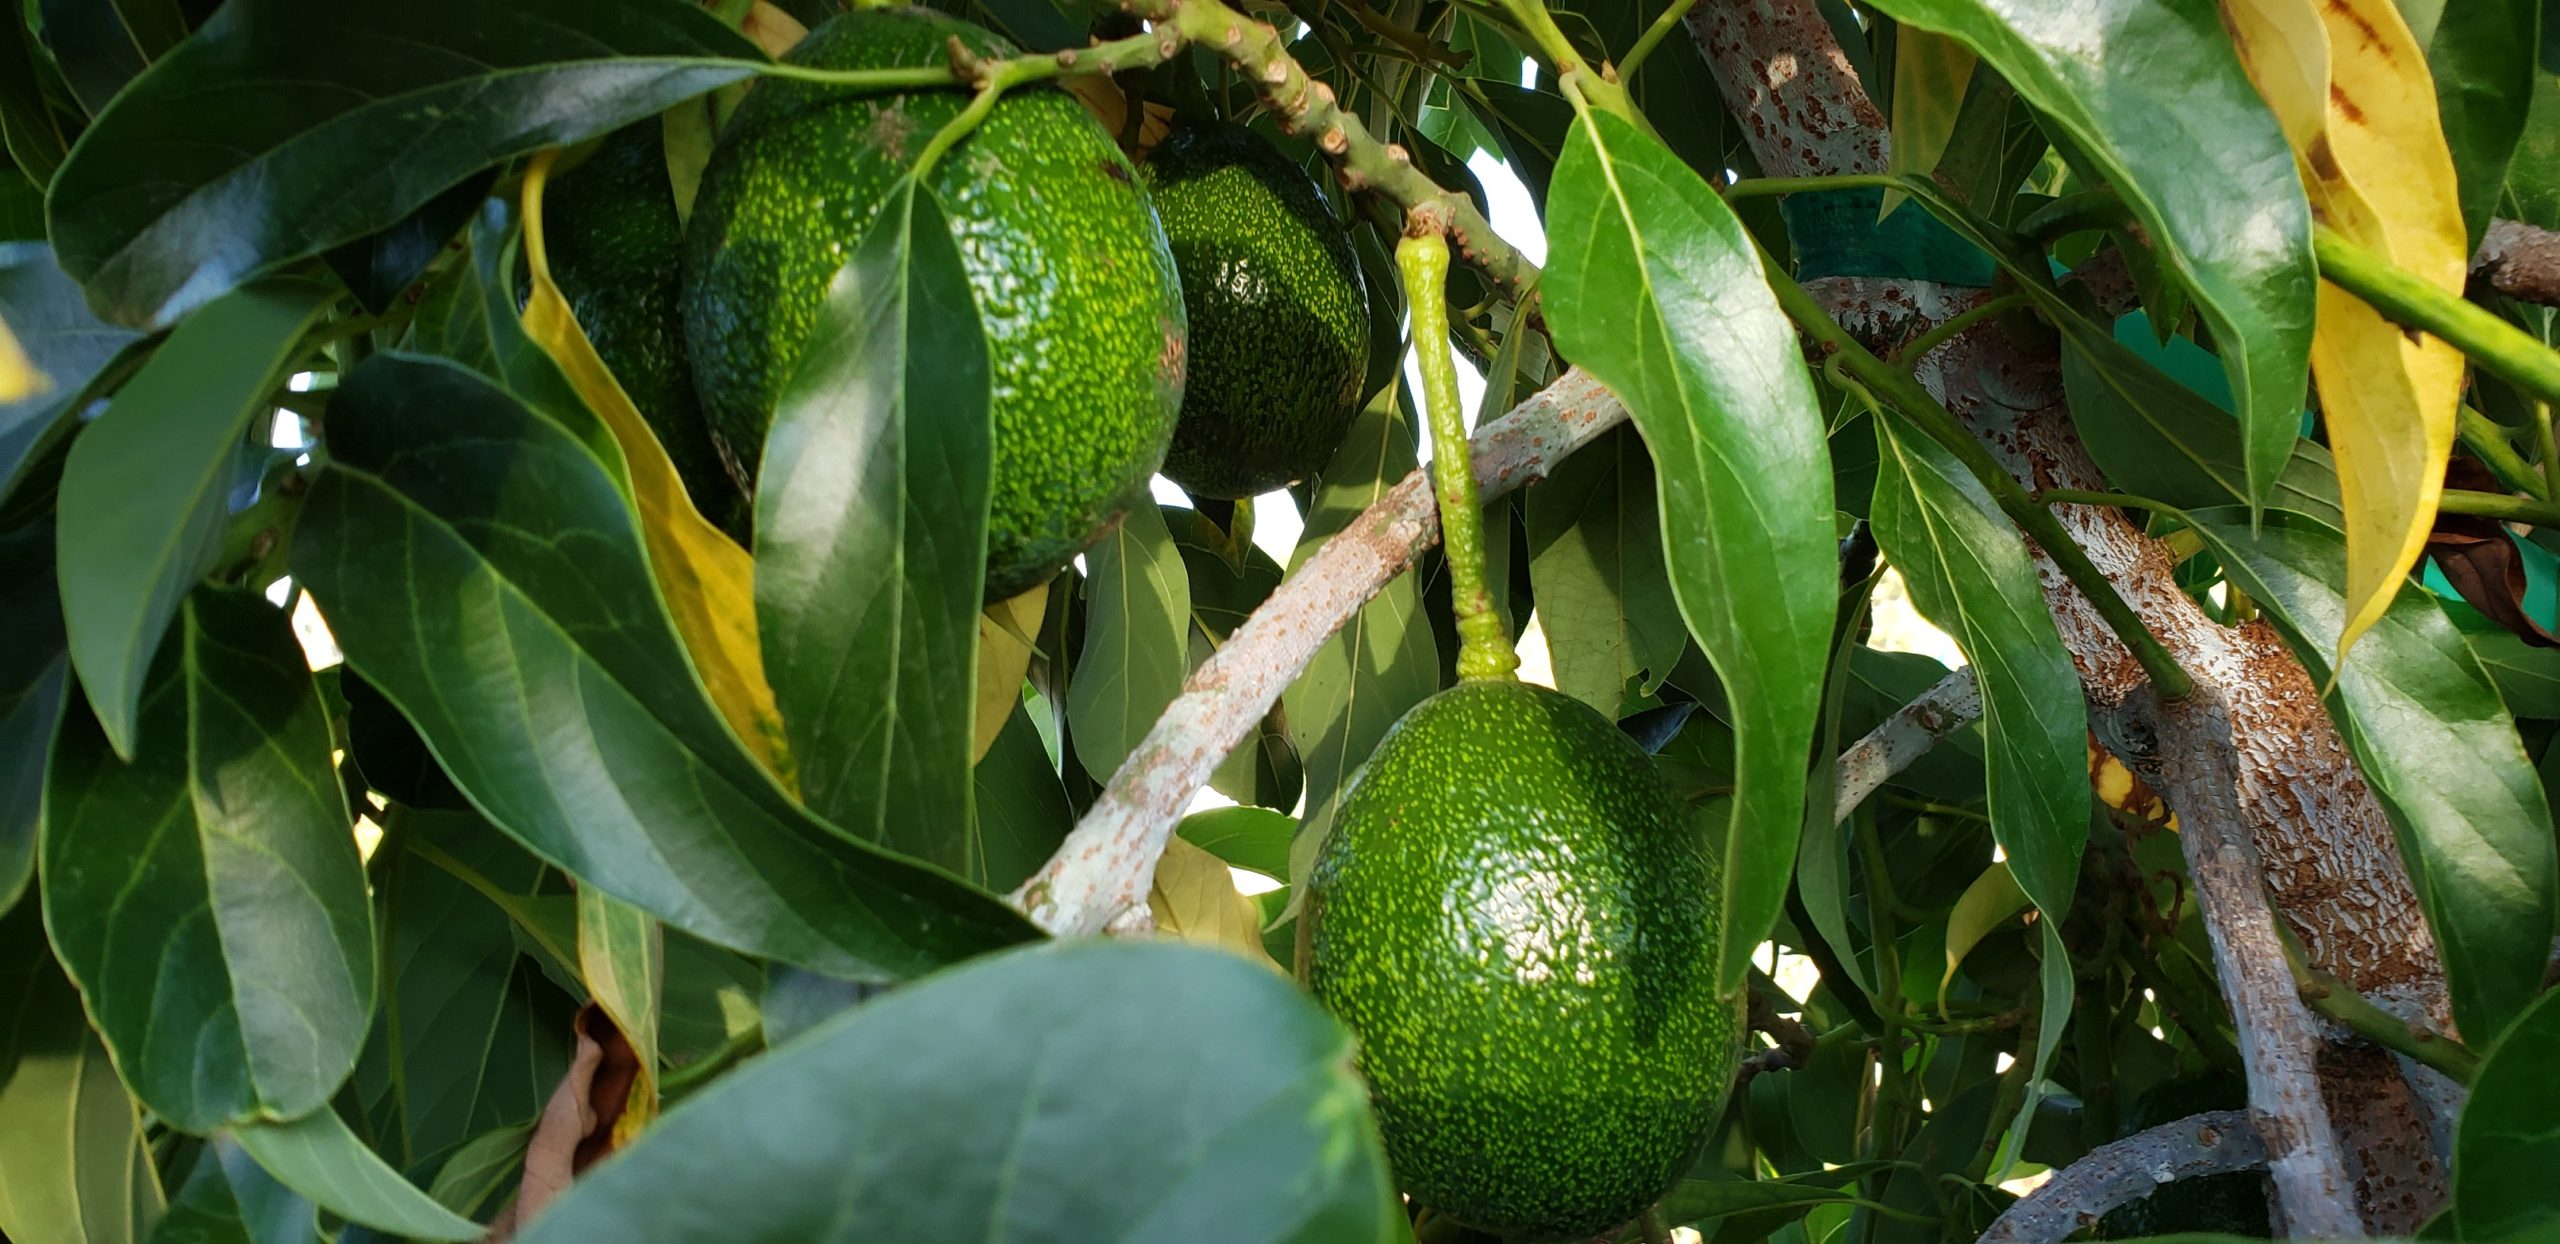 Great Garden Products - Reed Avocados 20191002_172044